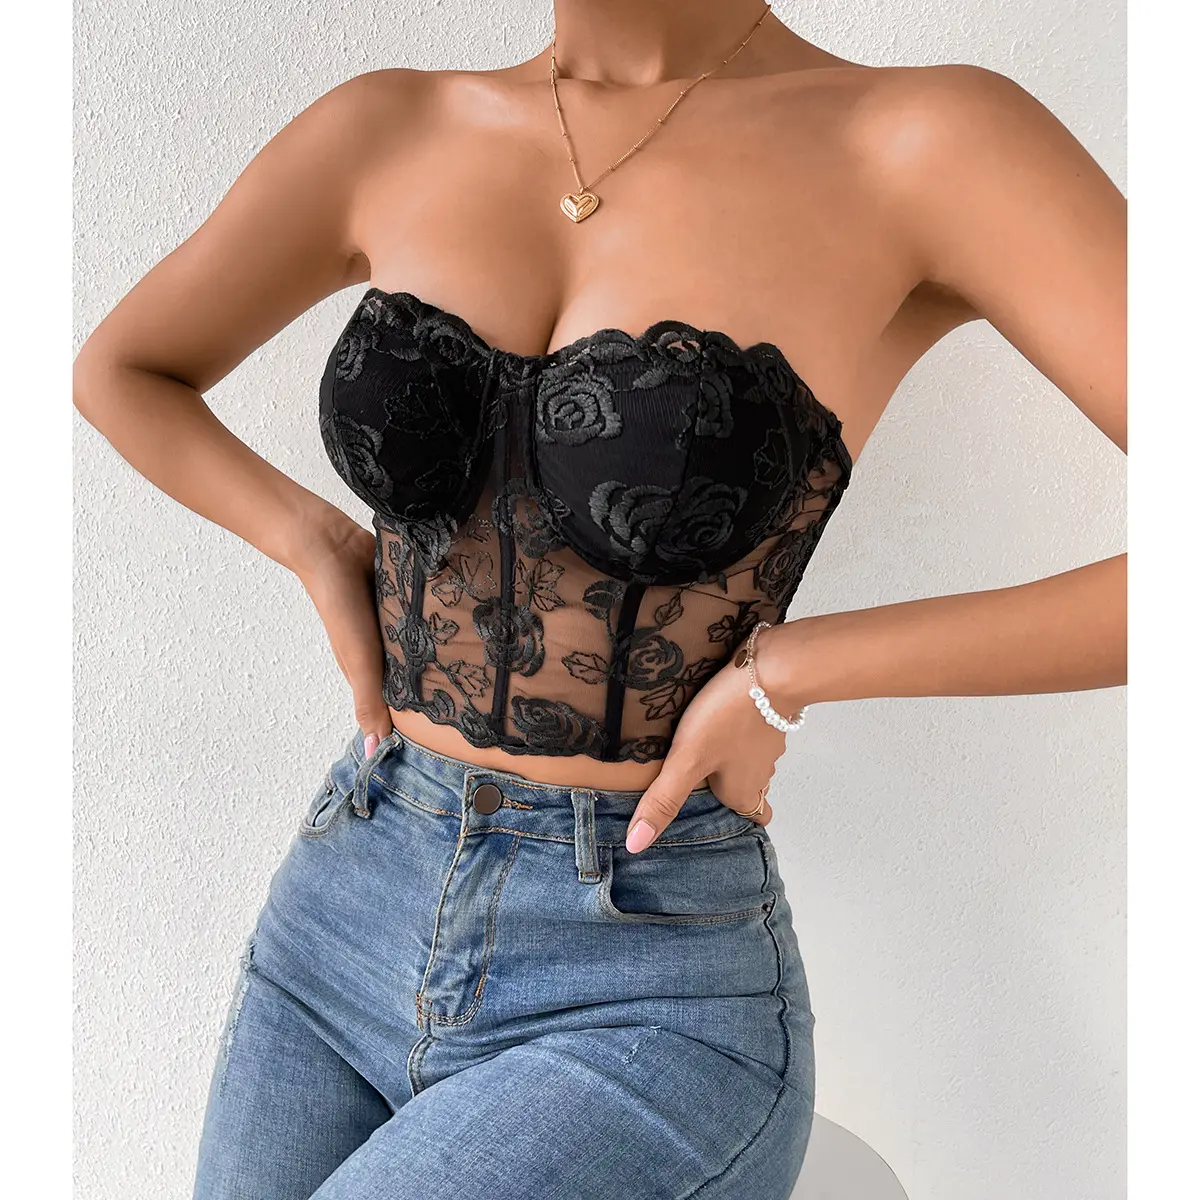 Black Women Three Dimensional Flower Steel Ring Wrapped Breast Off Shoulder Small Vest Corset Women's Corset Tops